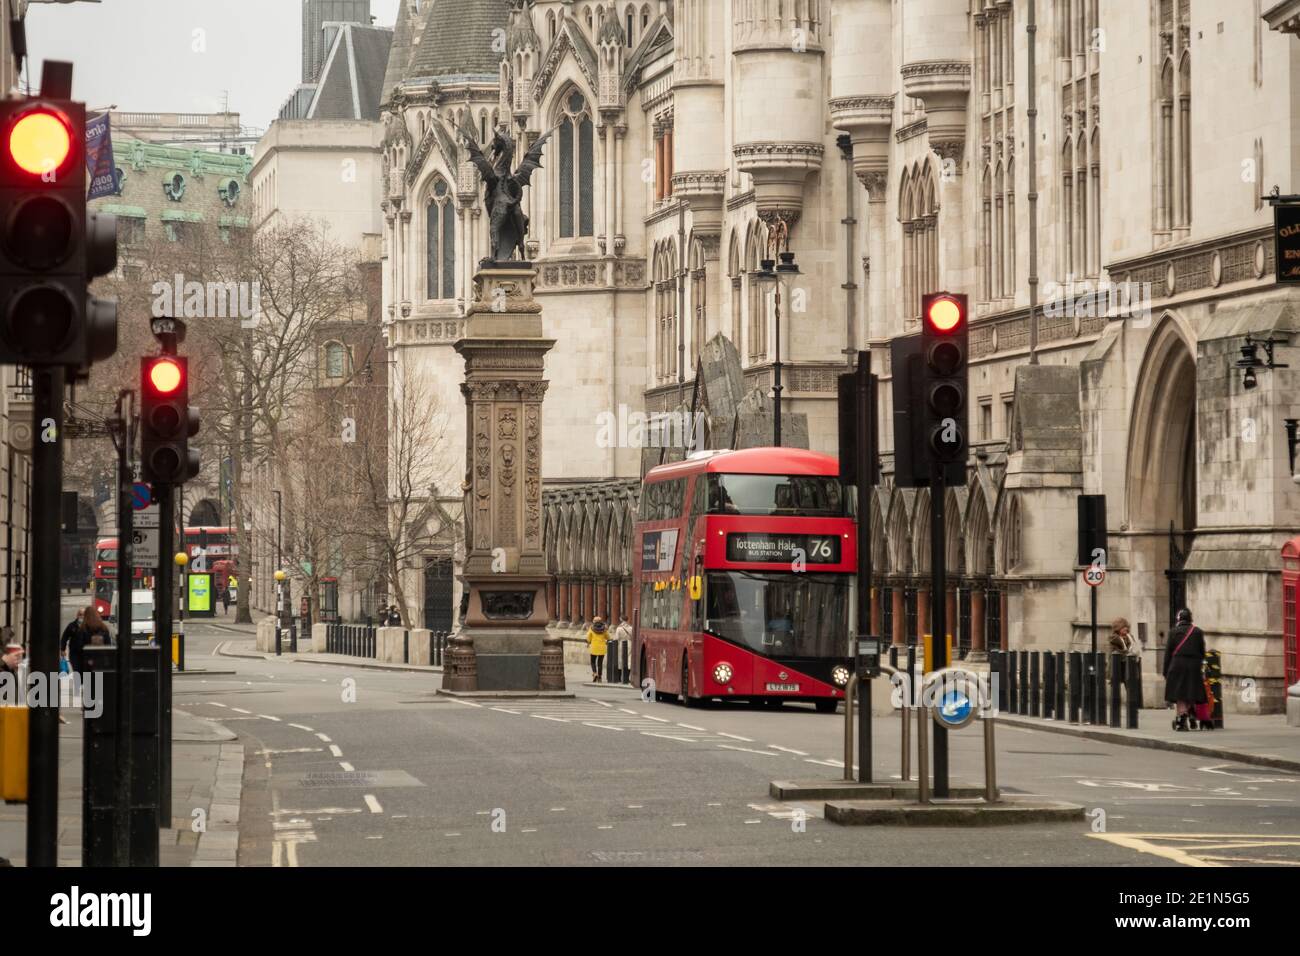 London, January 2021: Fleet Street and the Royal Courts of Justice. Empty street due to Covid 19 lockdown Stock Photo